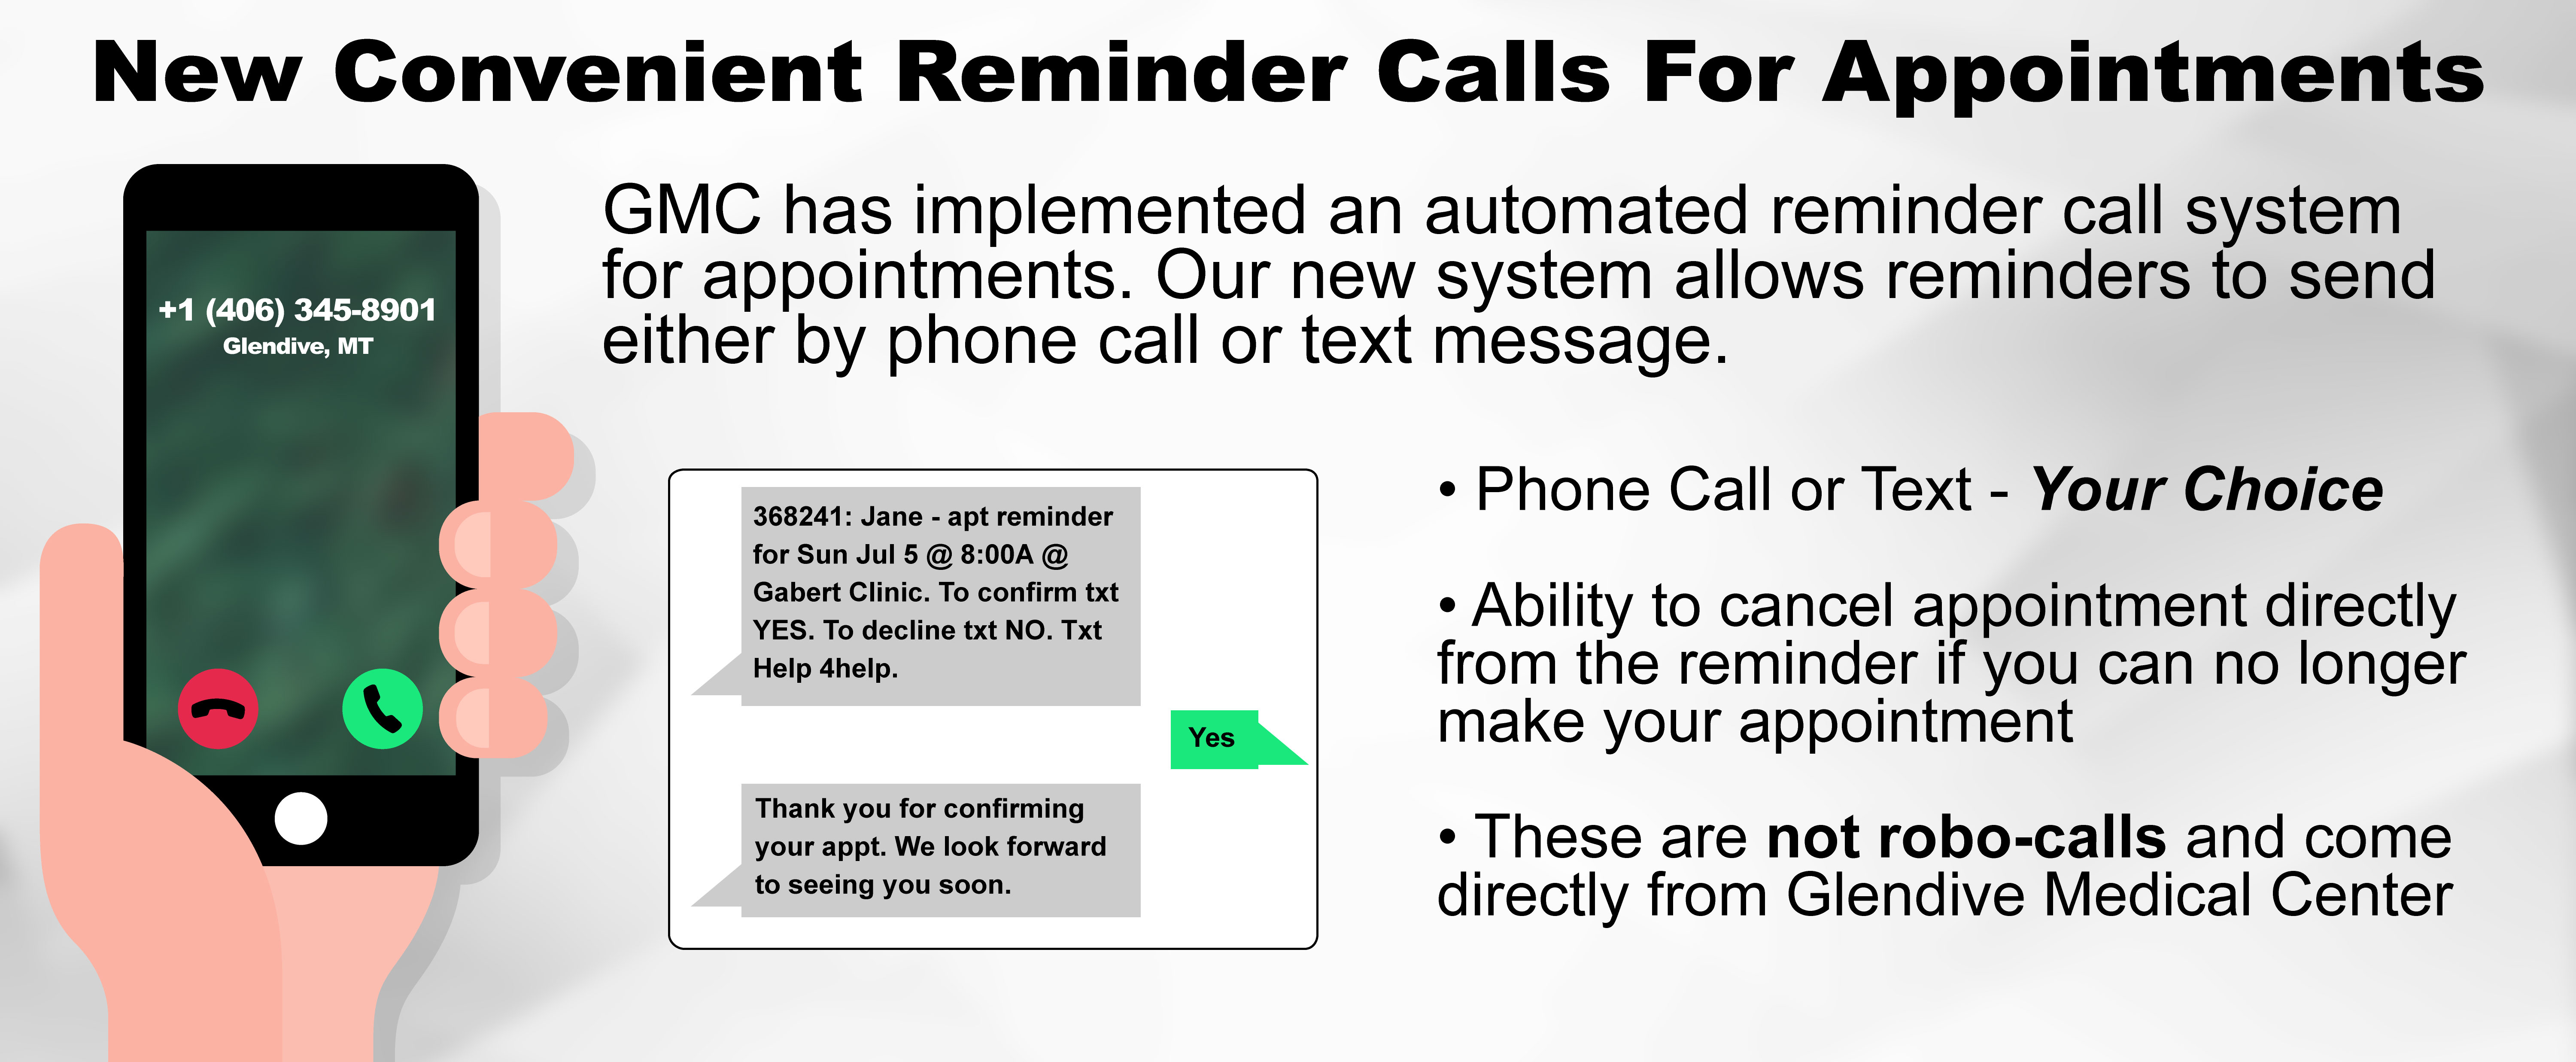 new convenient reminder calls for appointments information